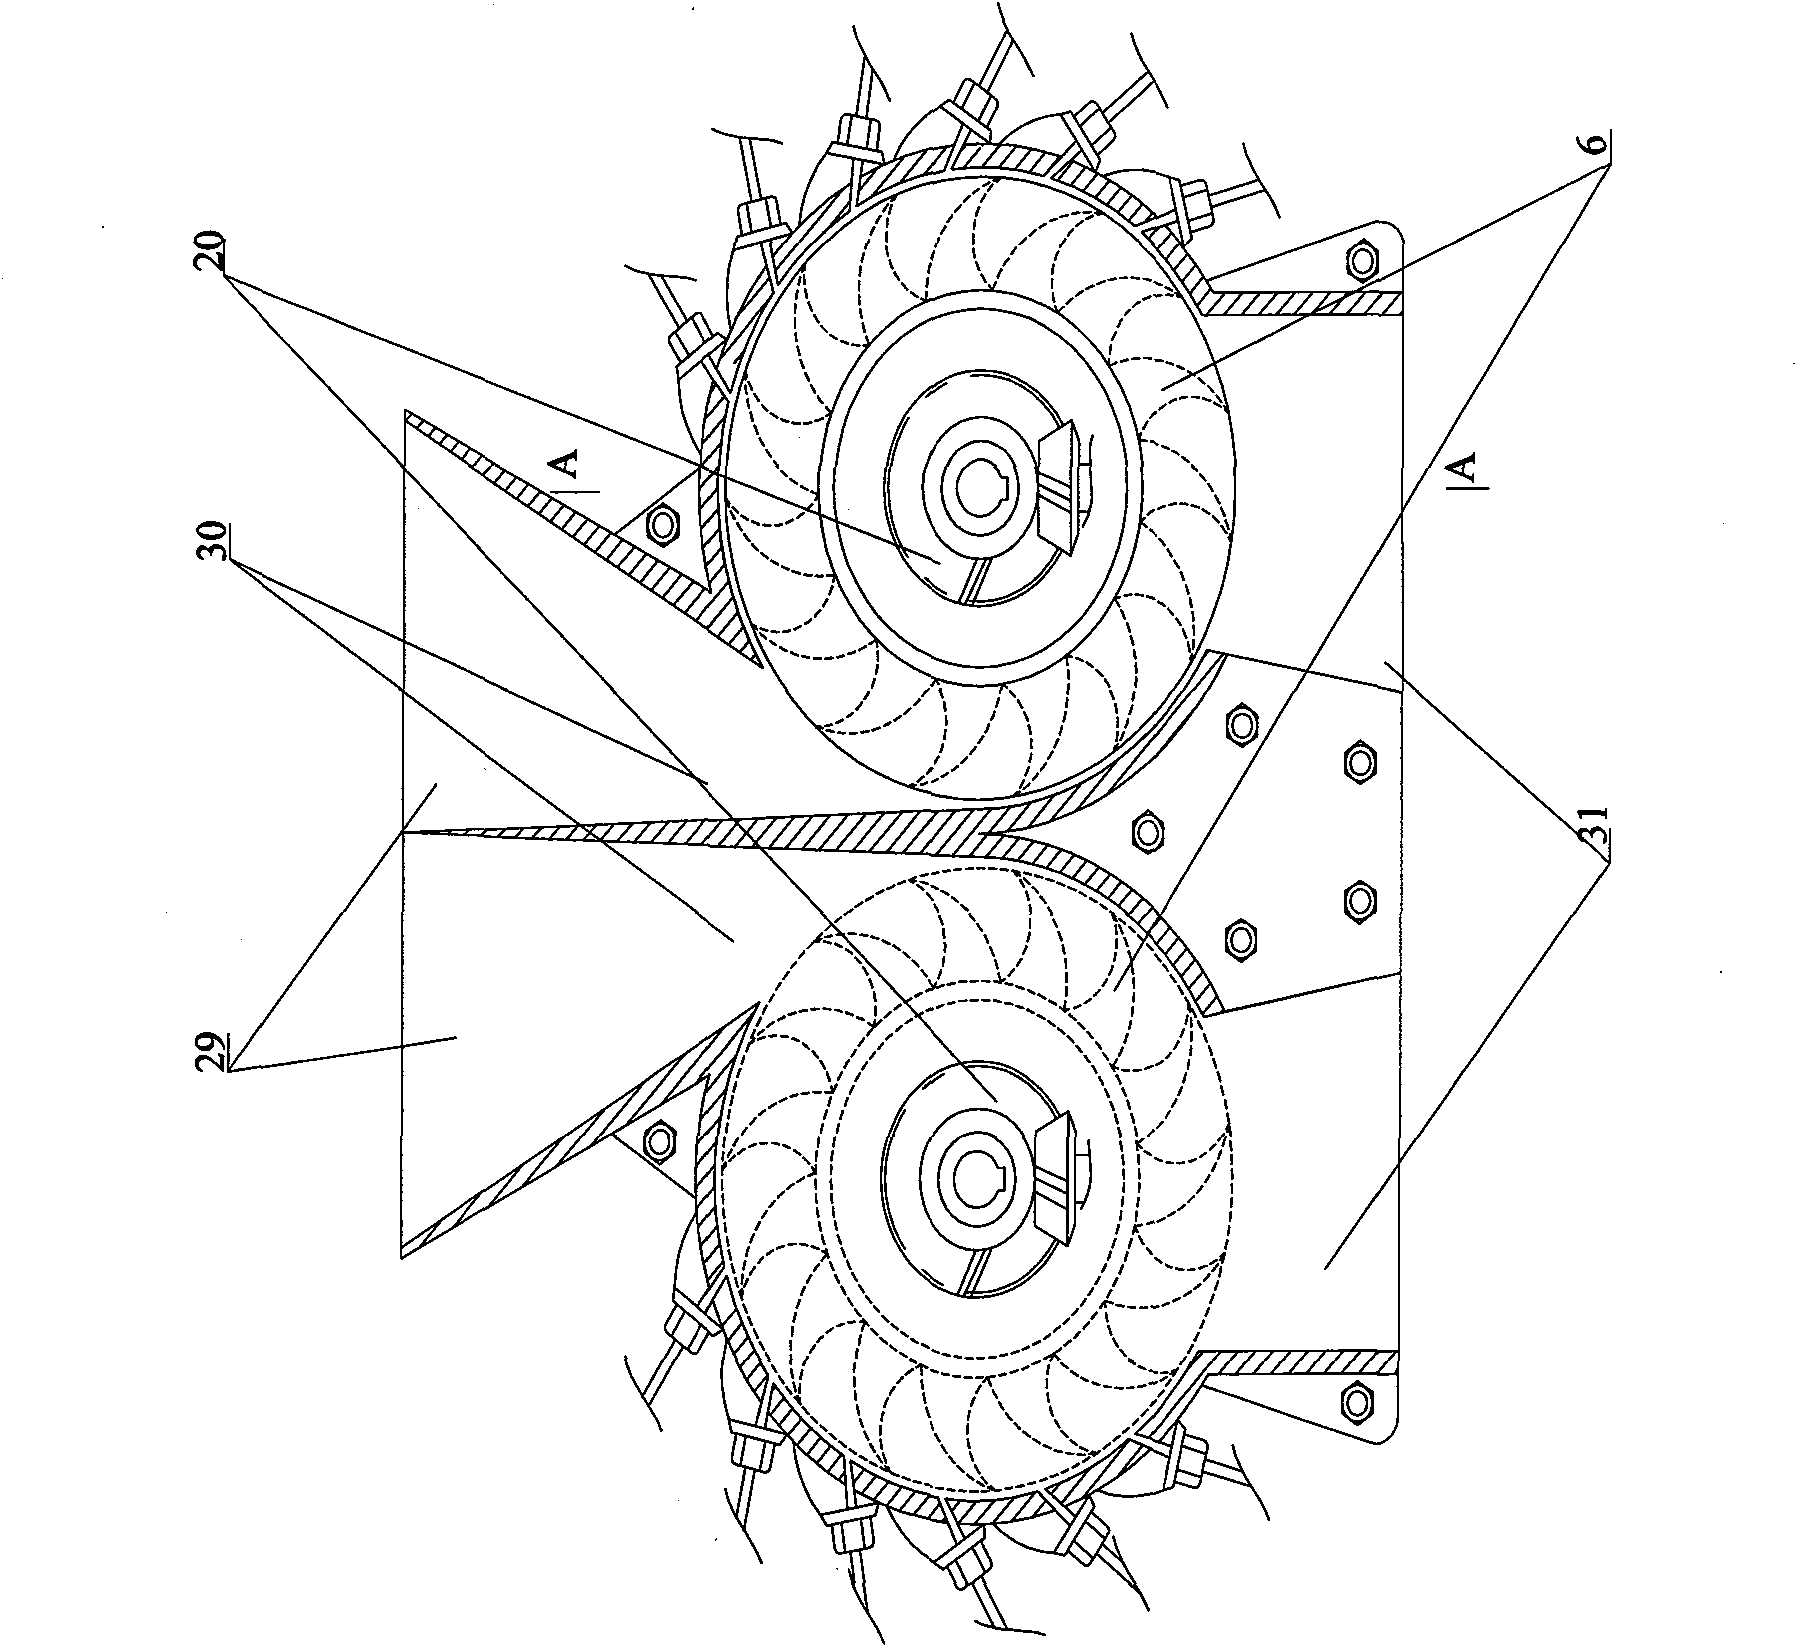 Impeller of wind-air engine and wind-air engine